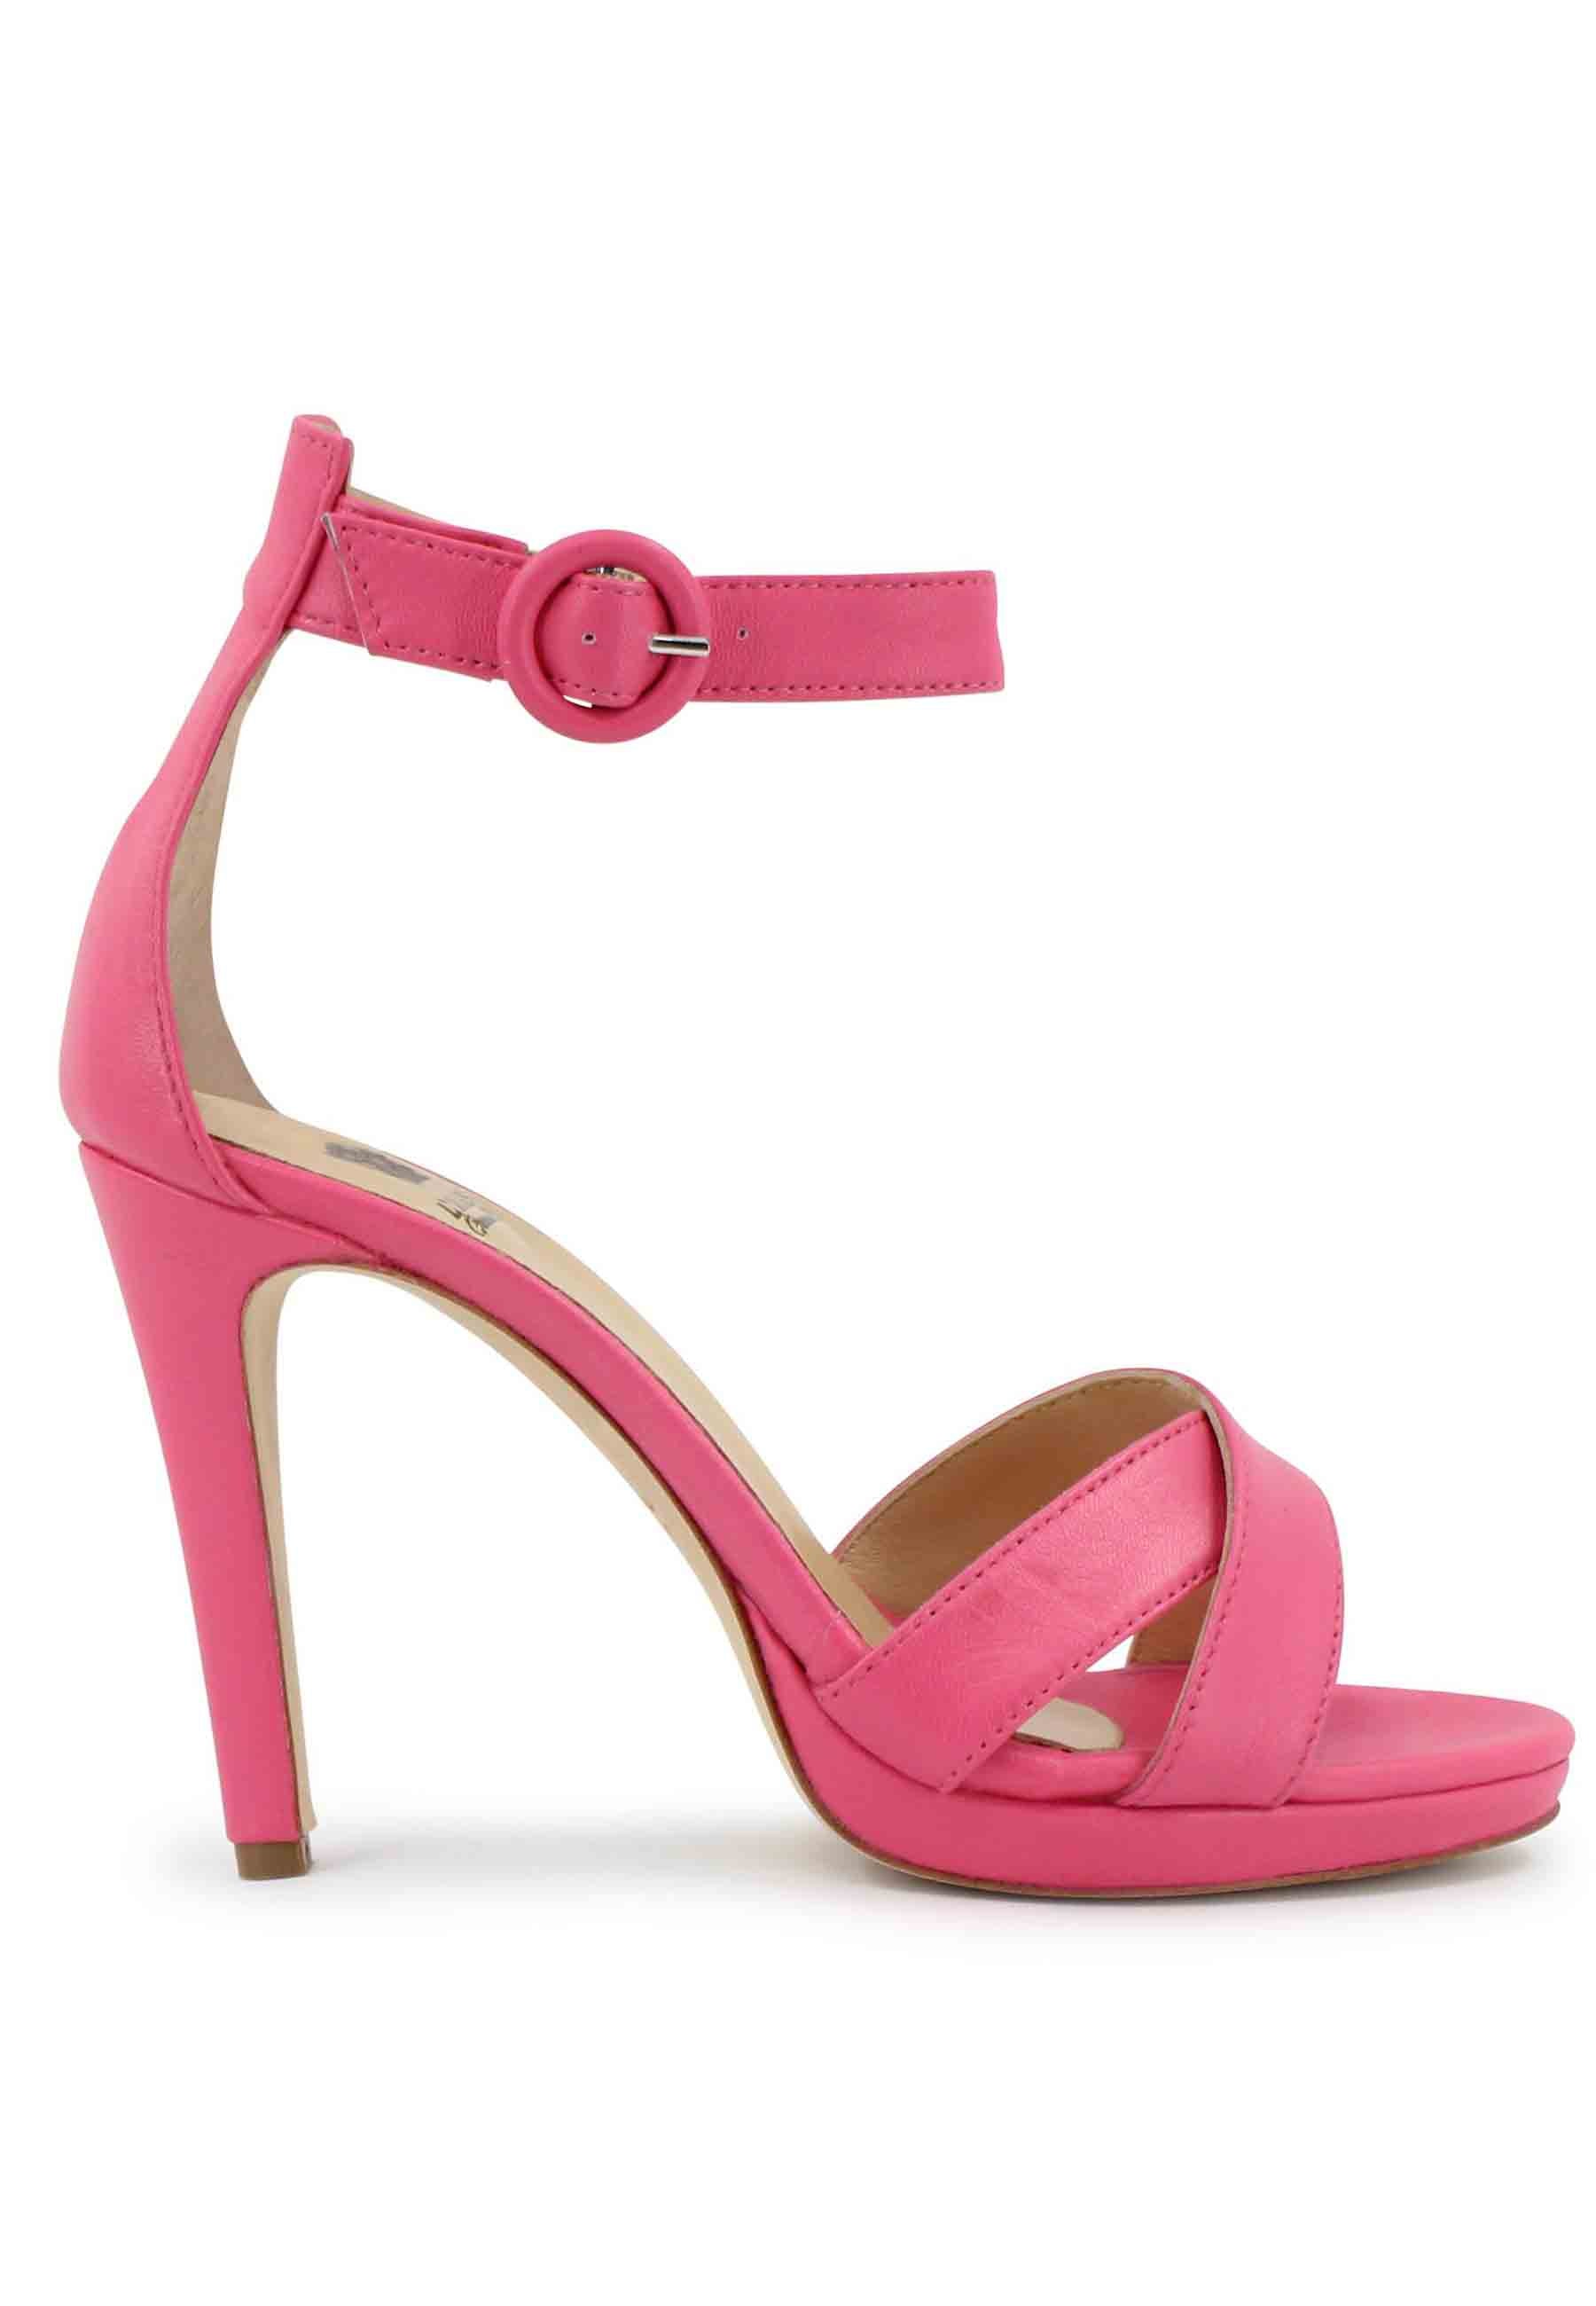 Women's pink leather sandals with high heel and ankle strap